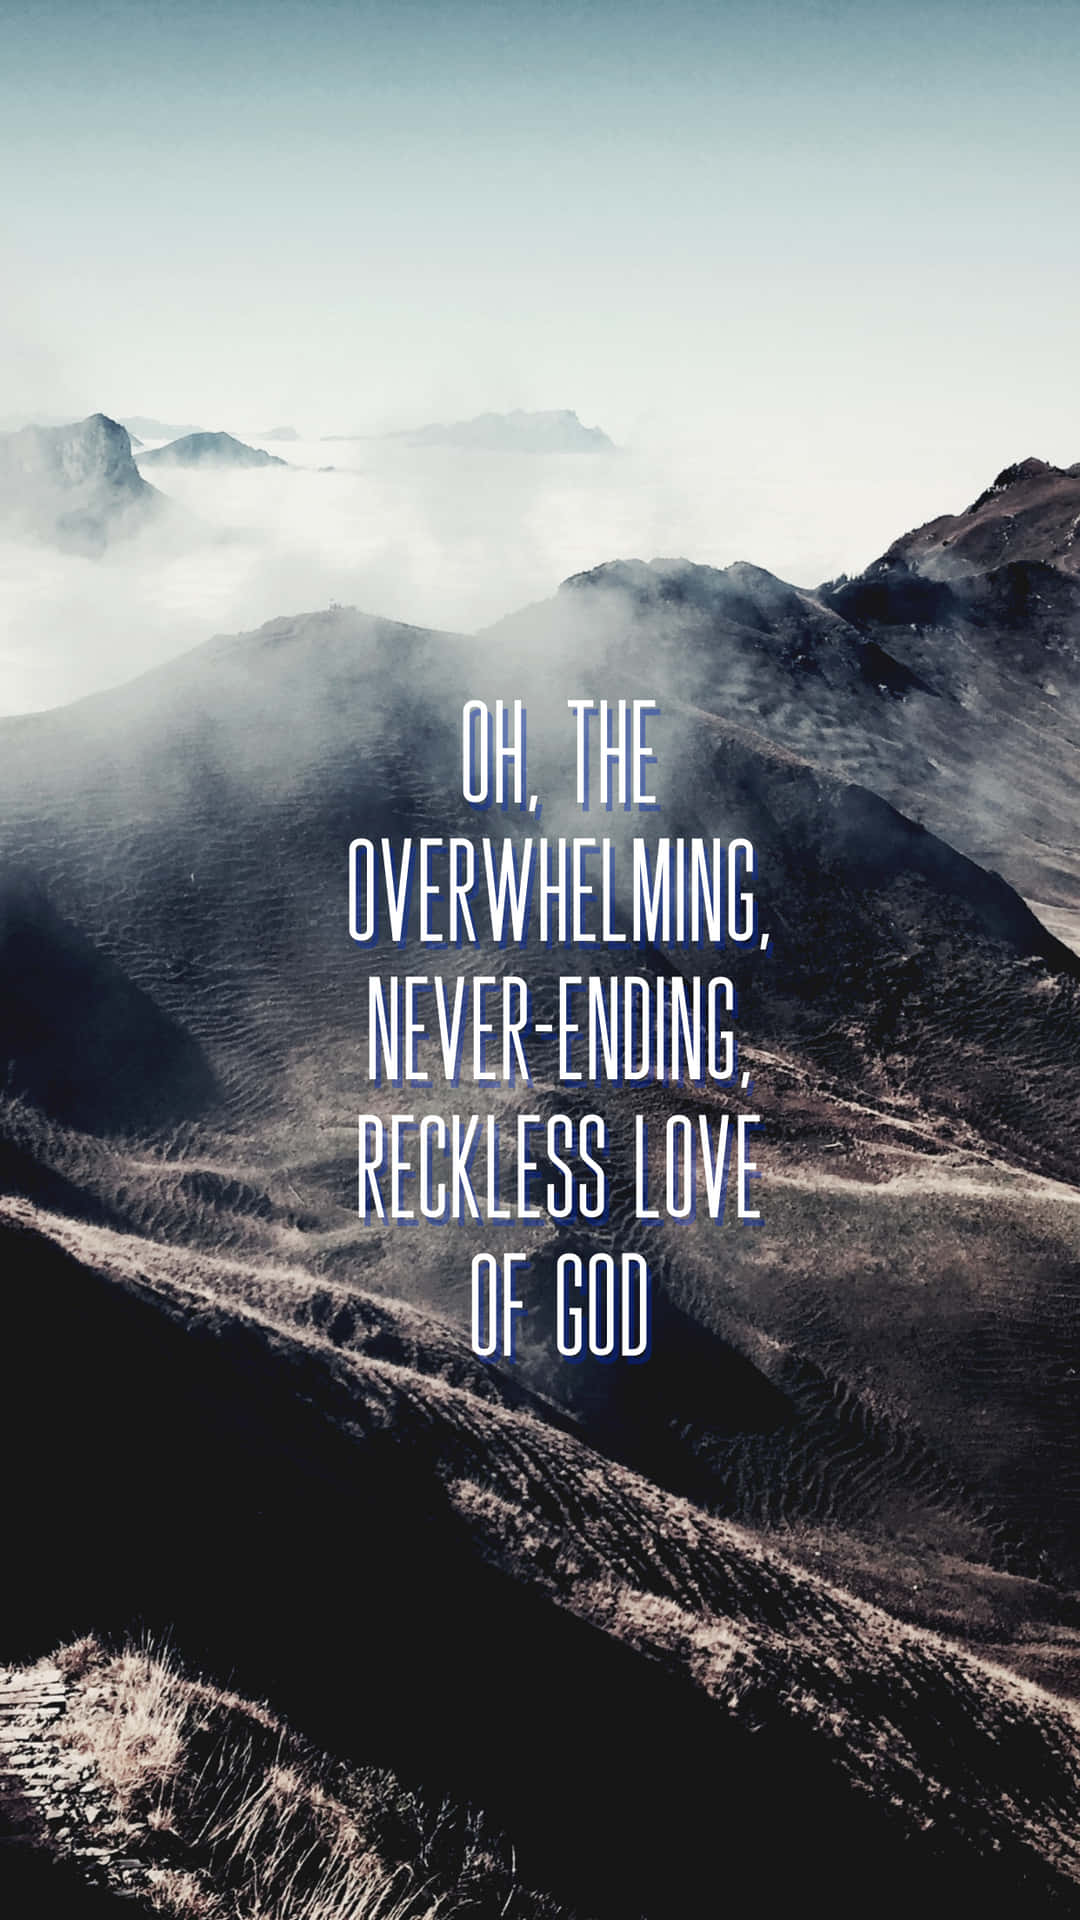 Quote About The Reckless Love Of God Wallpaper